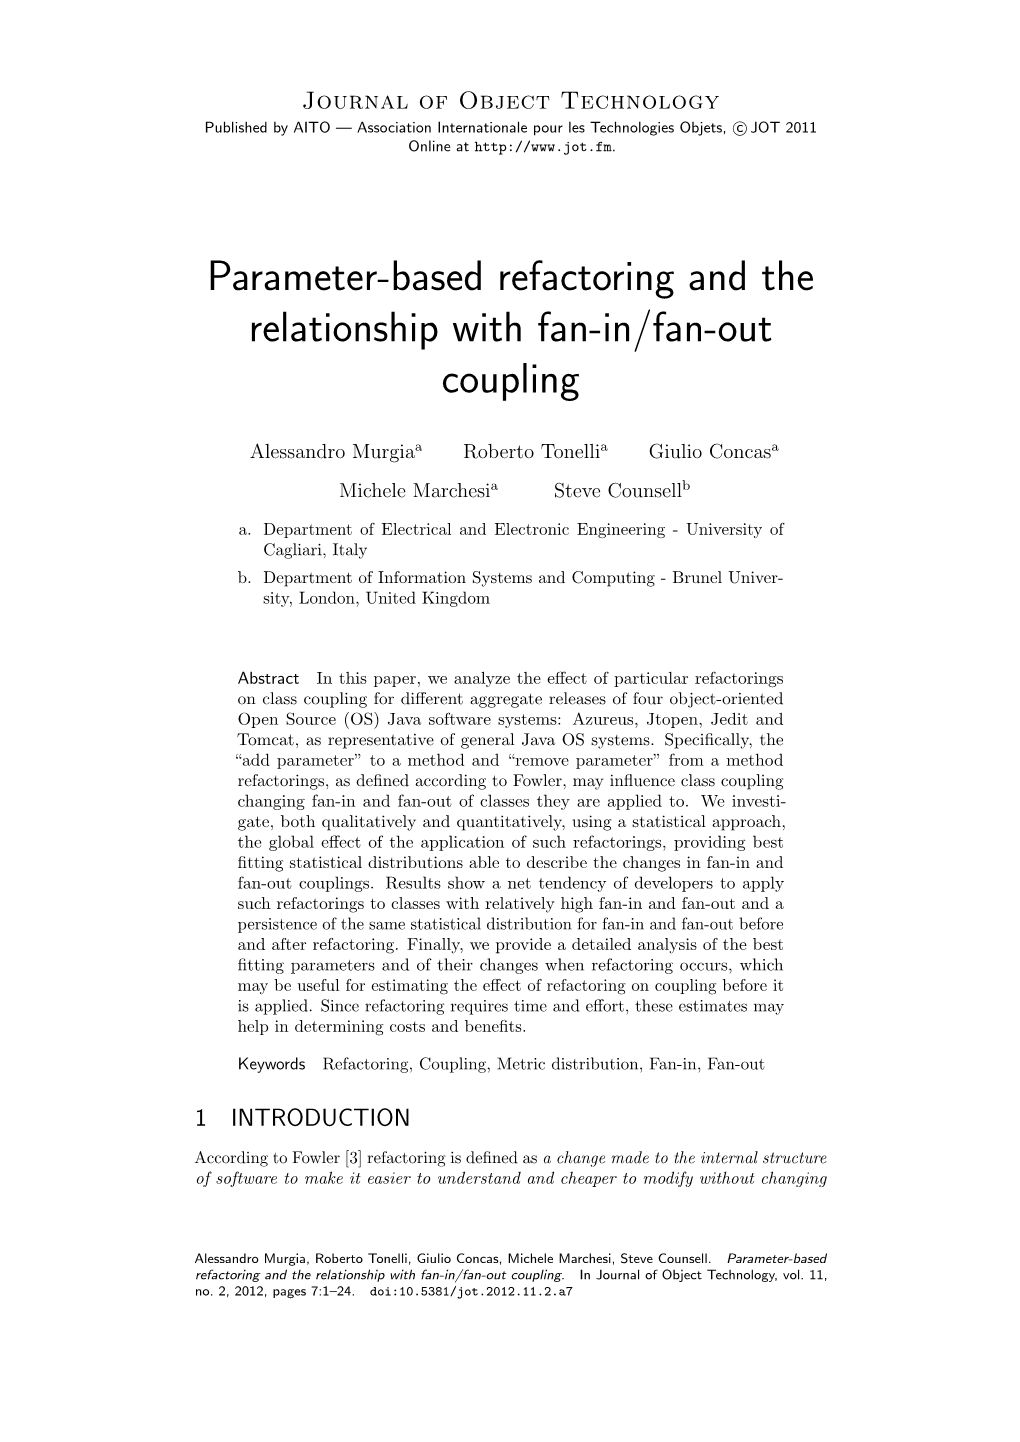 Parameter-Based Refactoring and the Relationship with Fan-In/Fan-Out Coupling